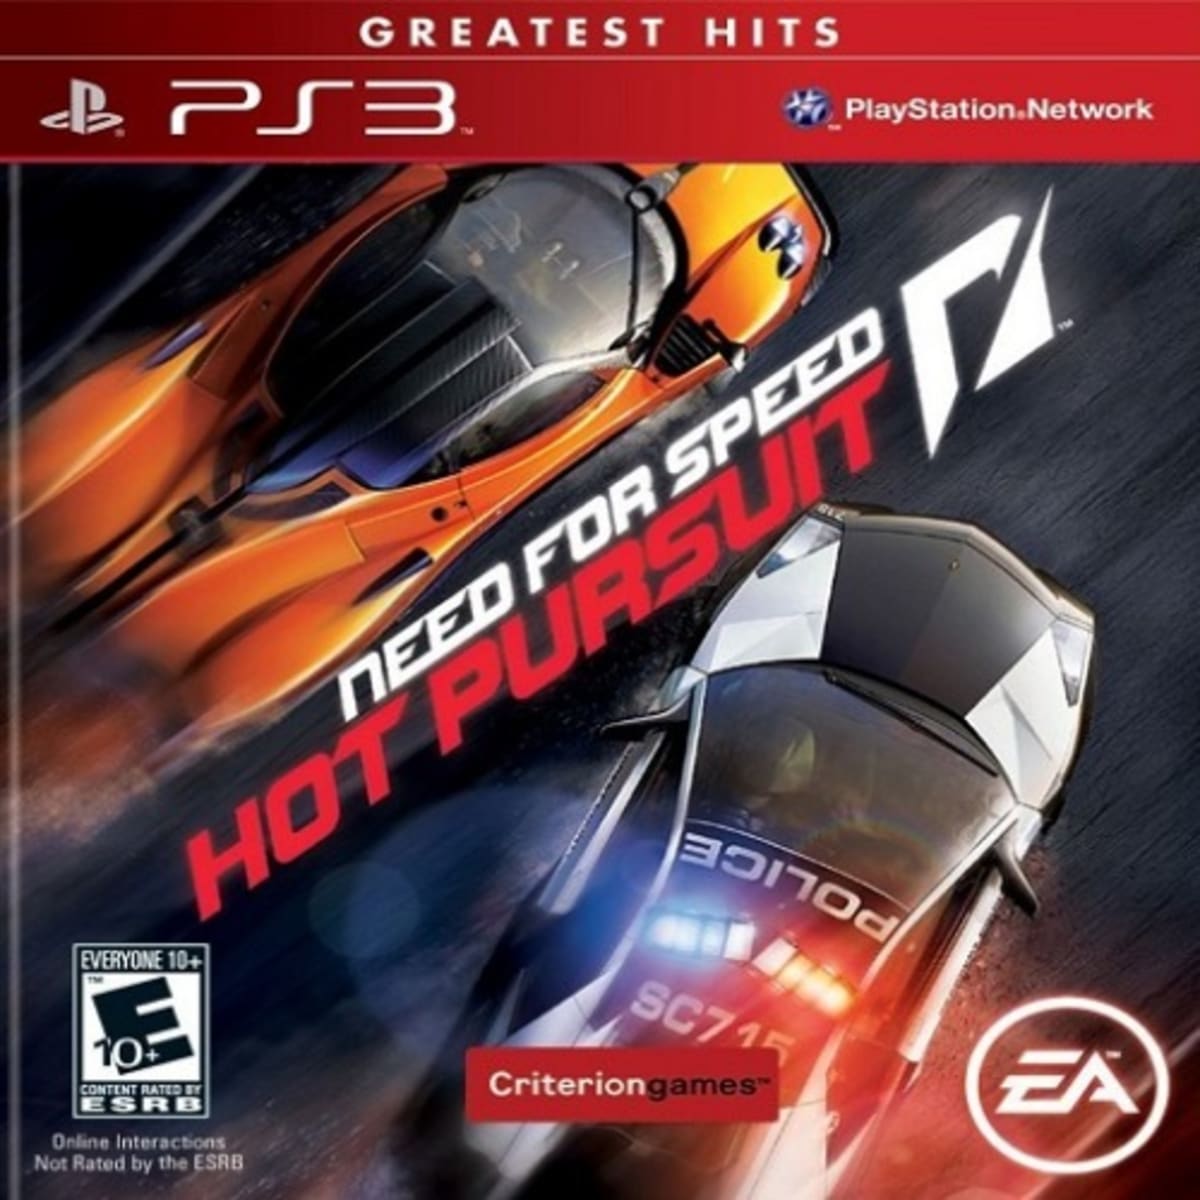 Play Need for Speed online 